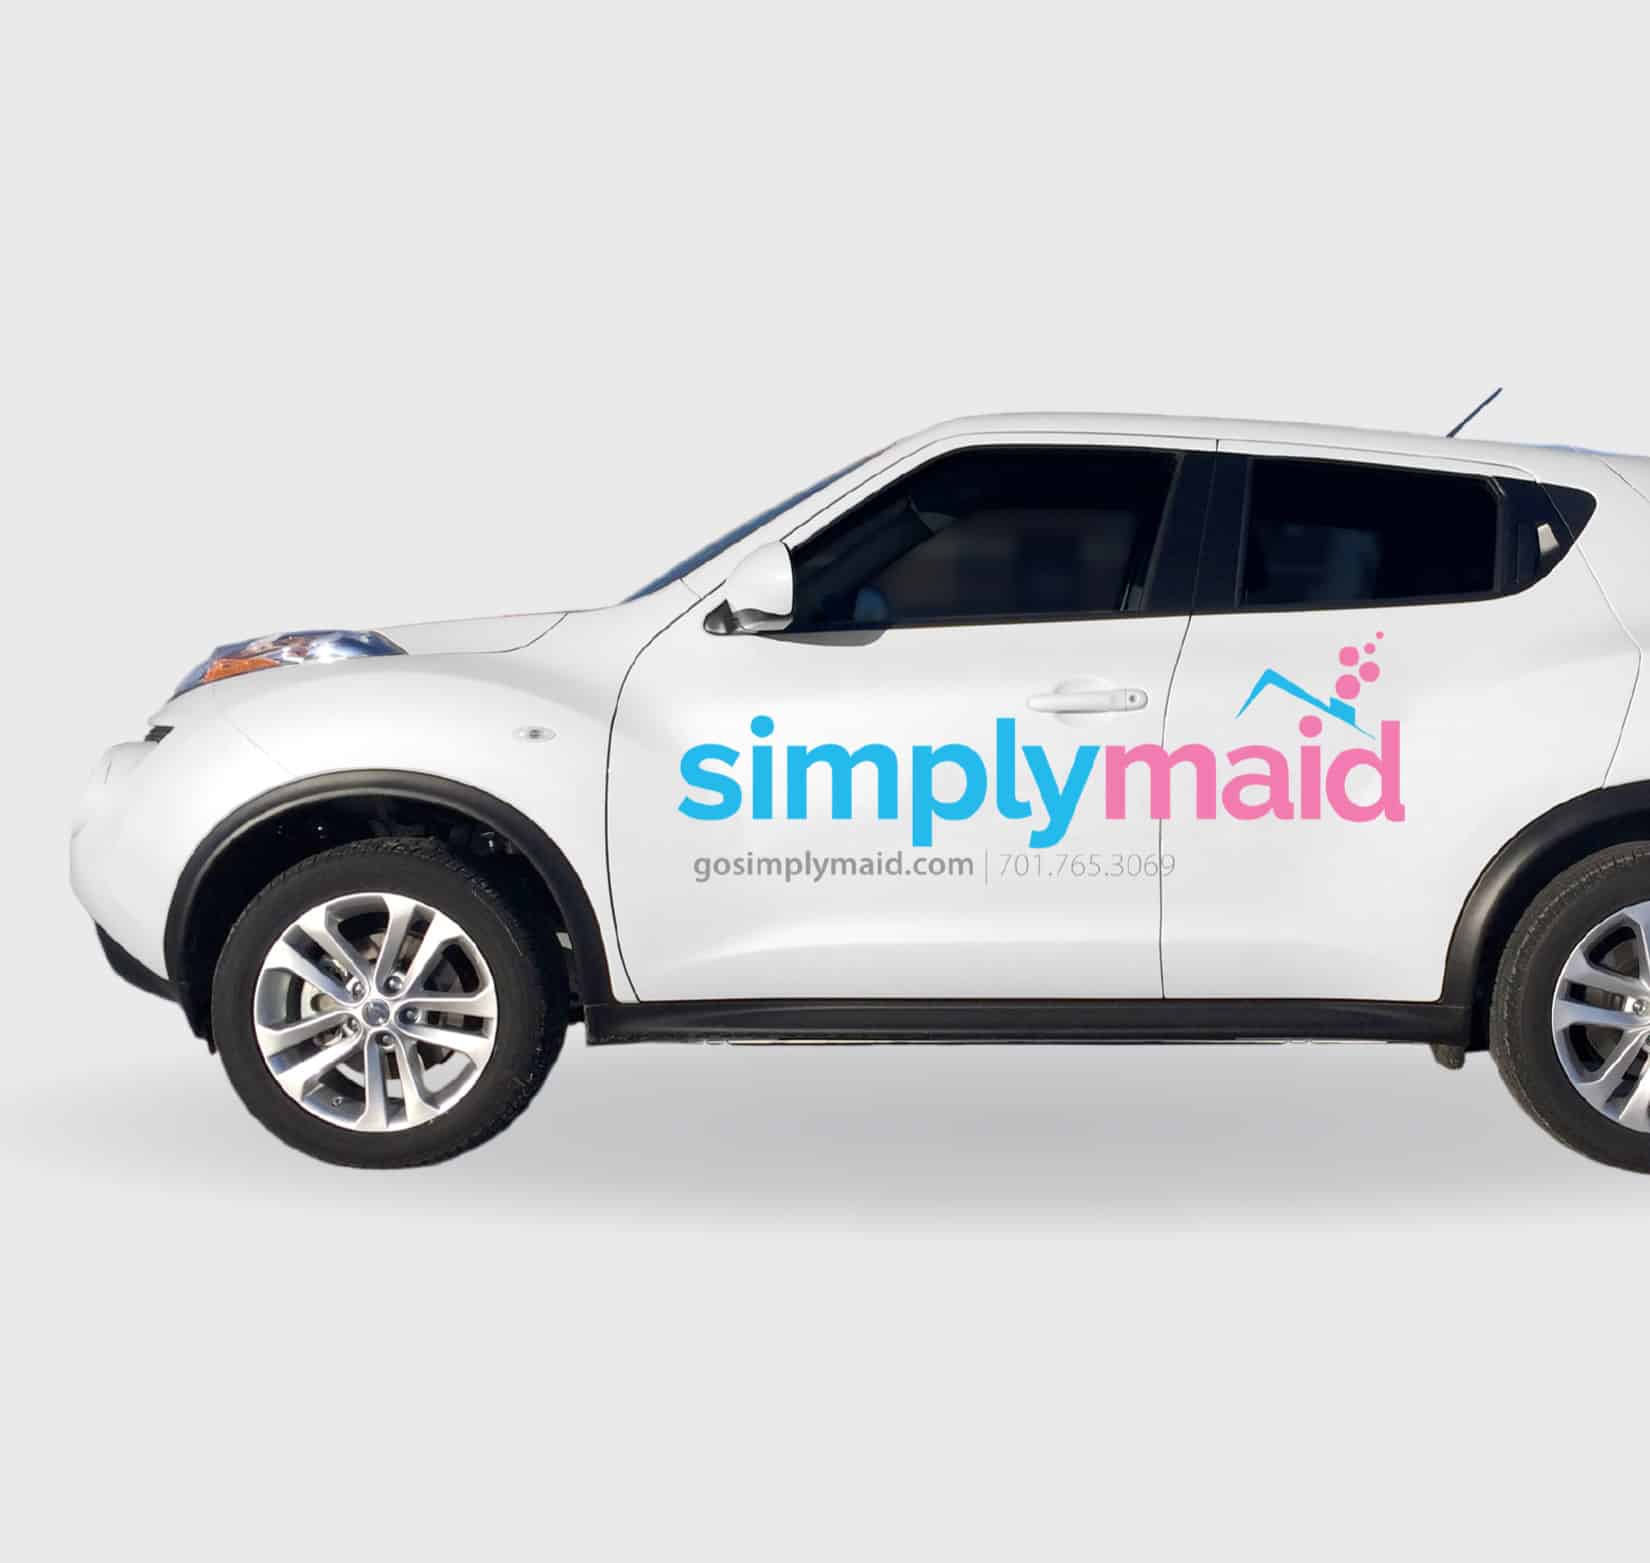 A vinyl vehicle wrap for SimplyMaid on a white SUV